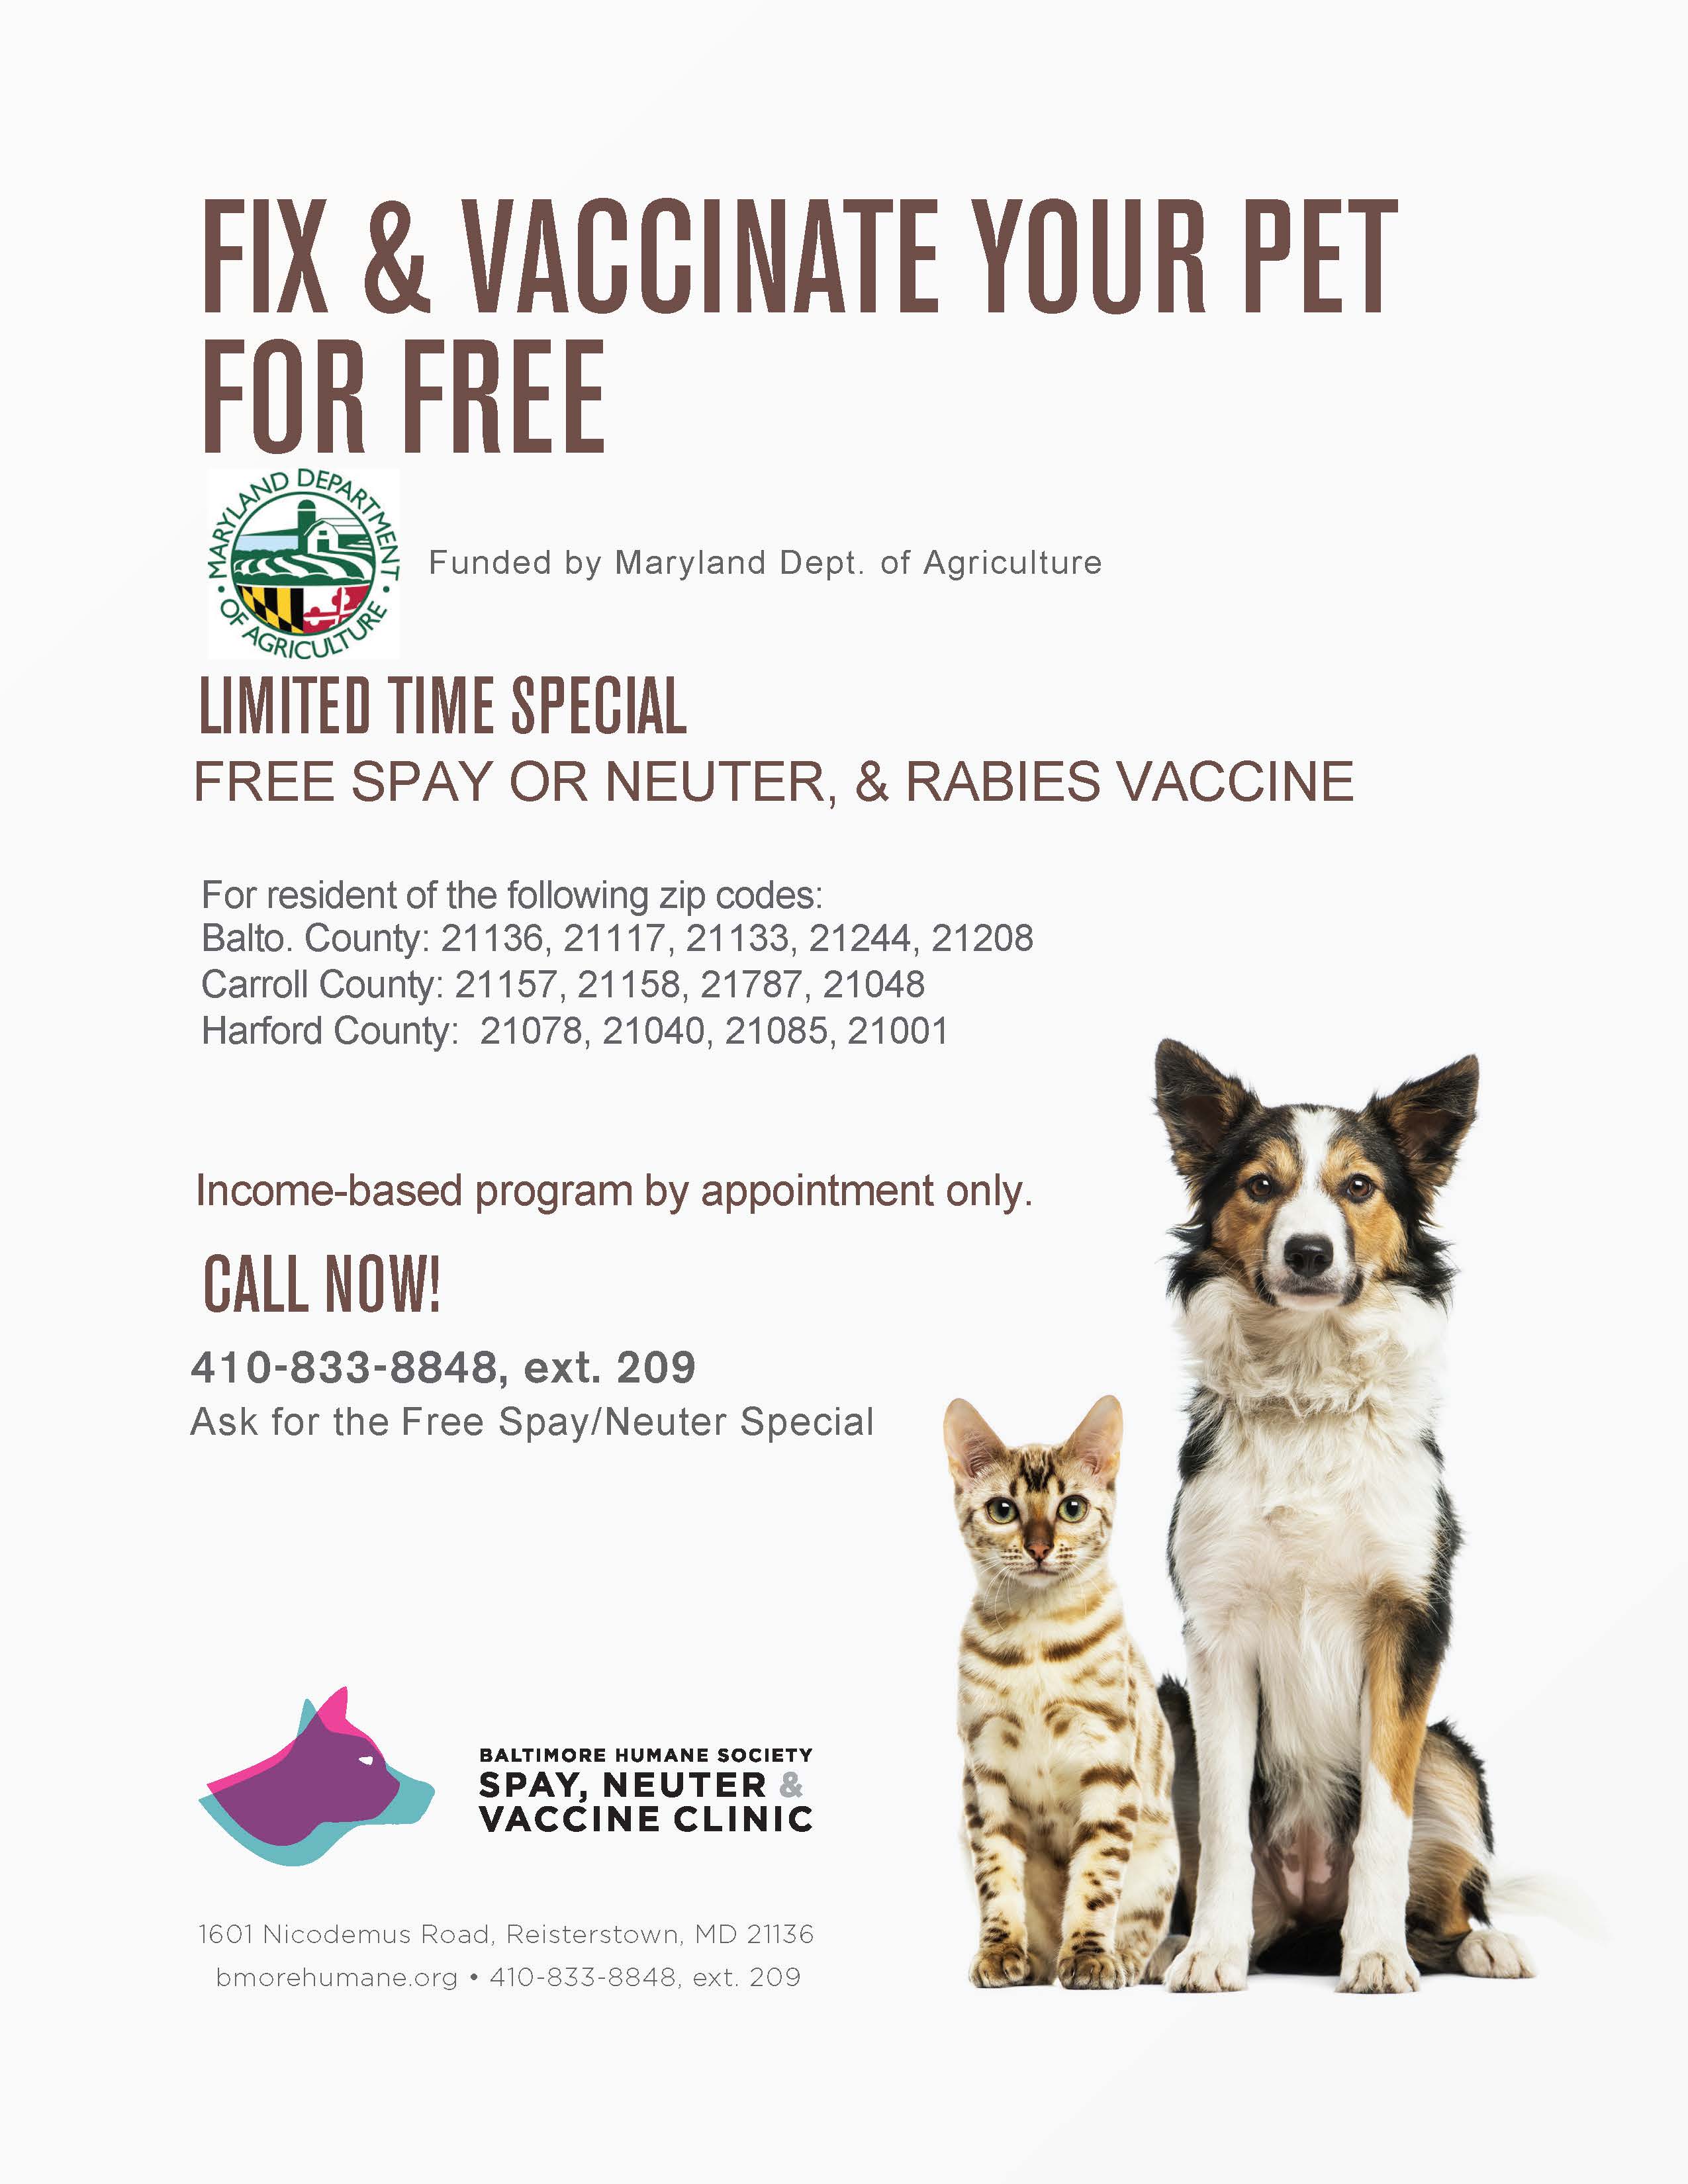 Free Spay/Neuter & Rabies Vaccines For Qualifying Zip Codes Baltimore